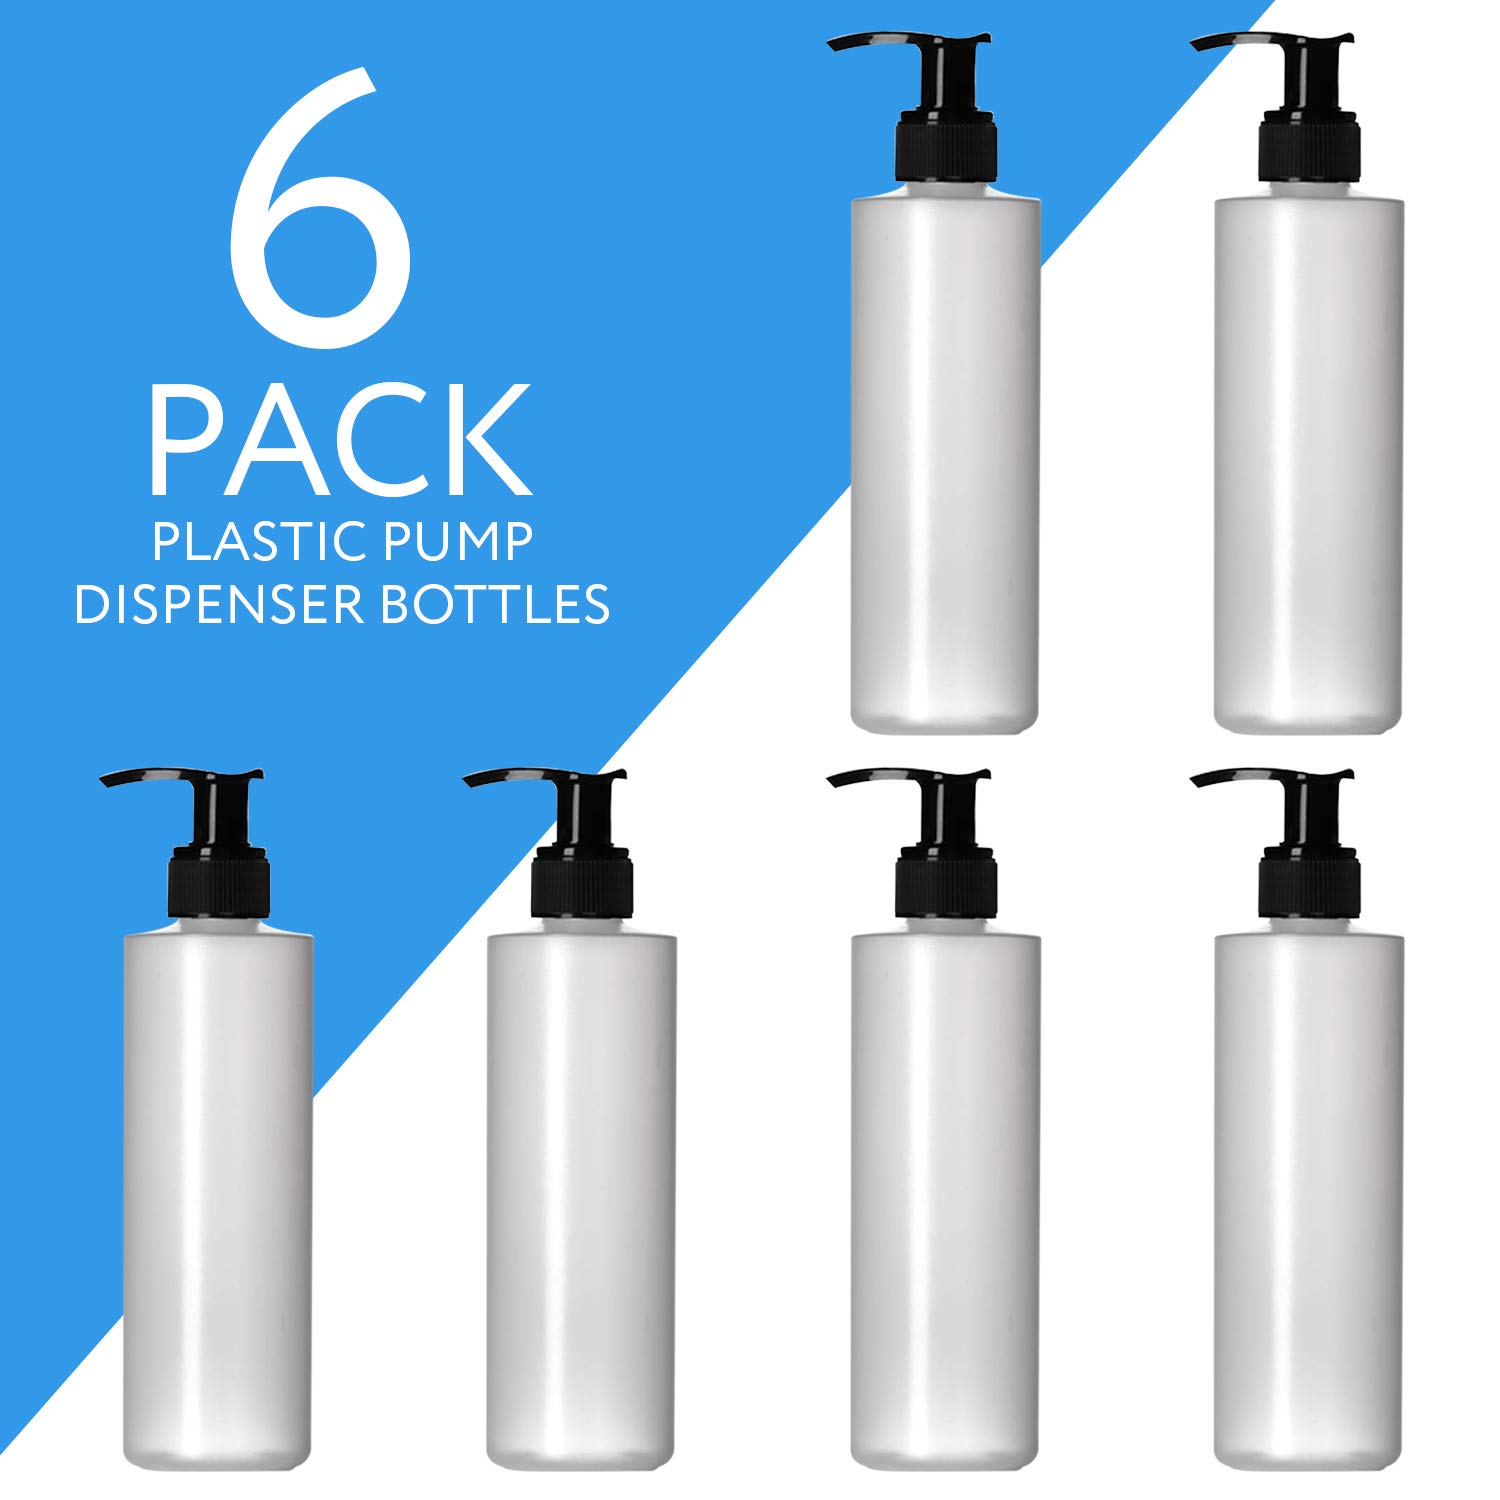 6 Pack 8 Oz Plastic Pump Dispenser Bottles for Lotion, Massage Oil, Shampoo and More! - Refillable, BPA Free Clear/Frosted Empty 8oz Containers - Fit Into Holsters, Bulk